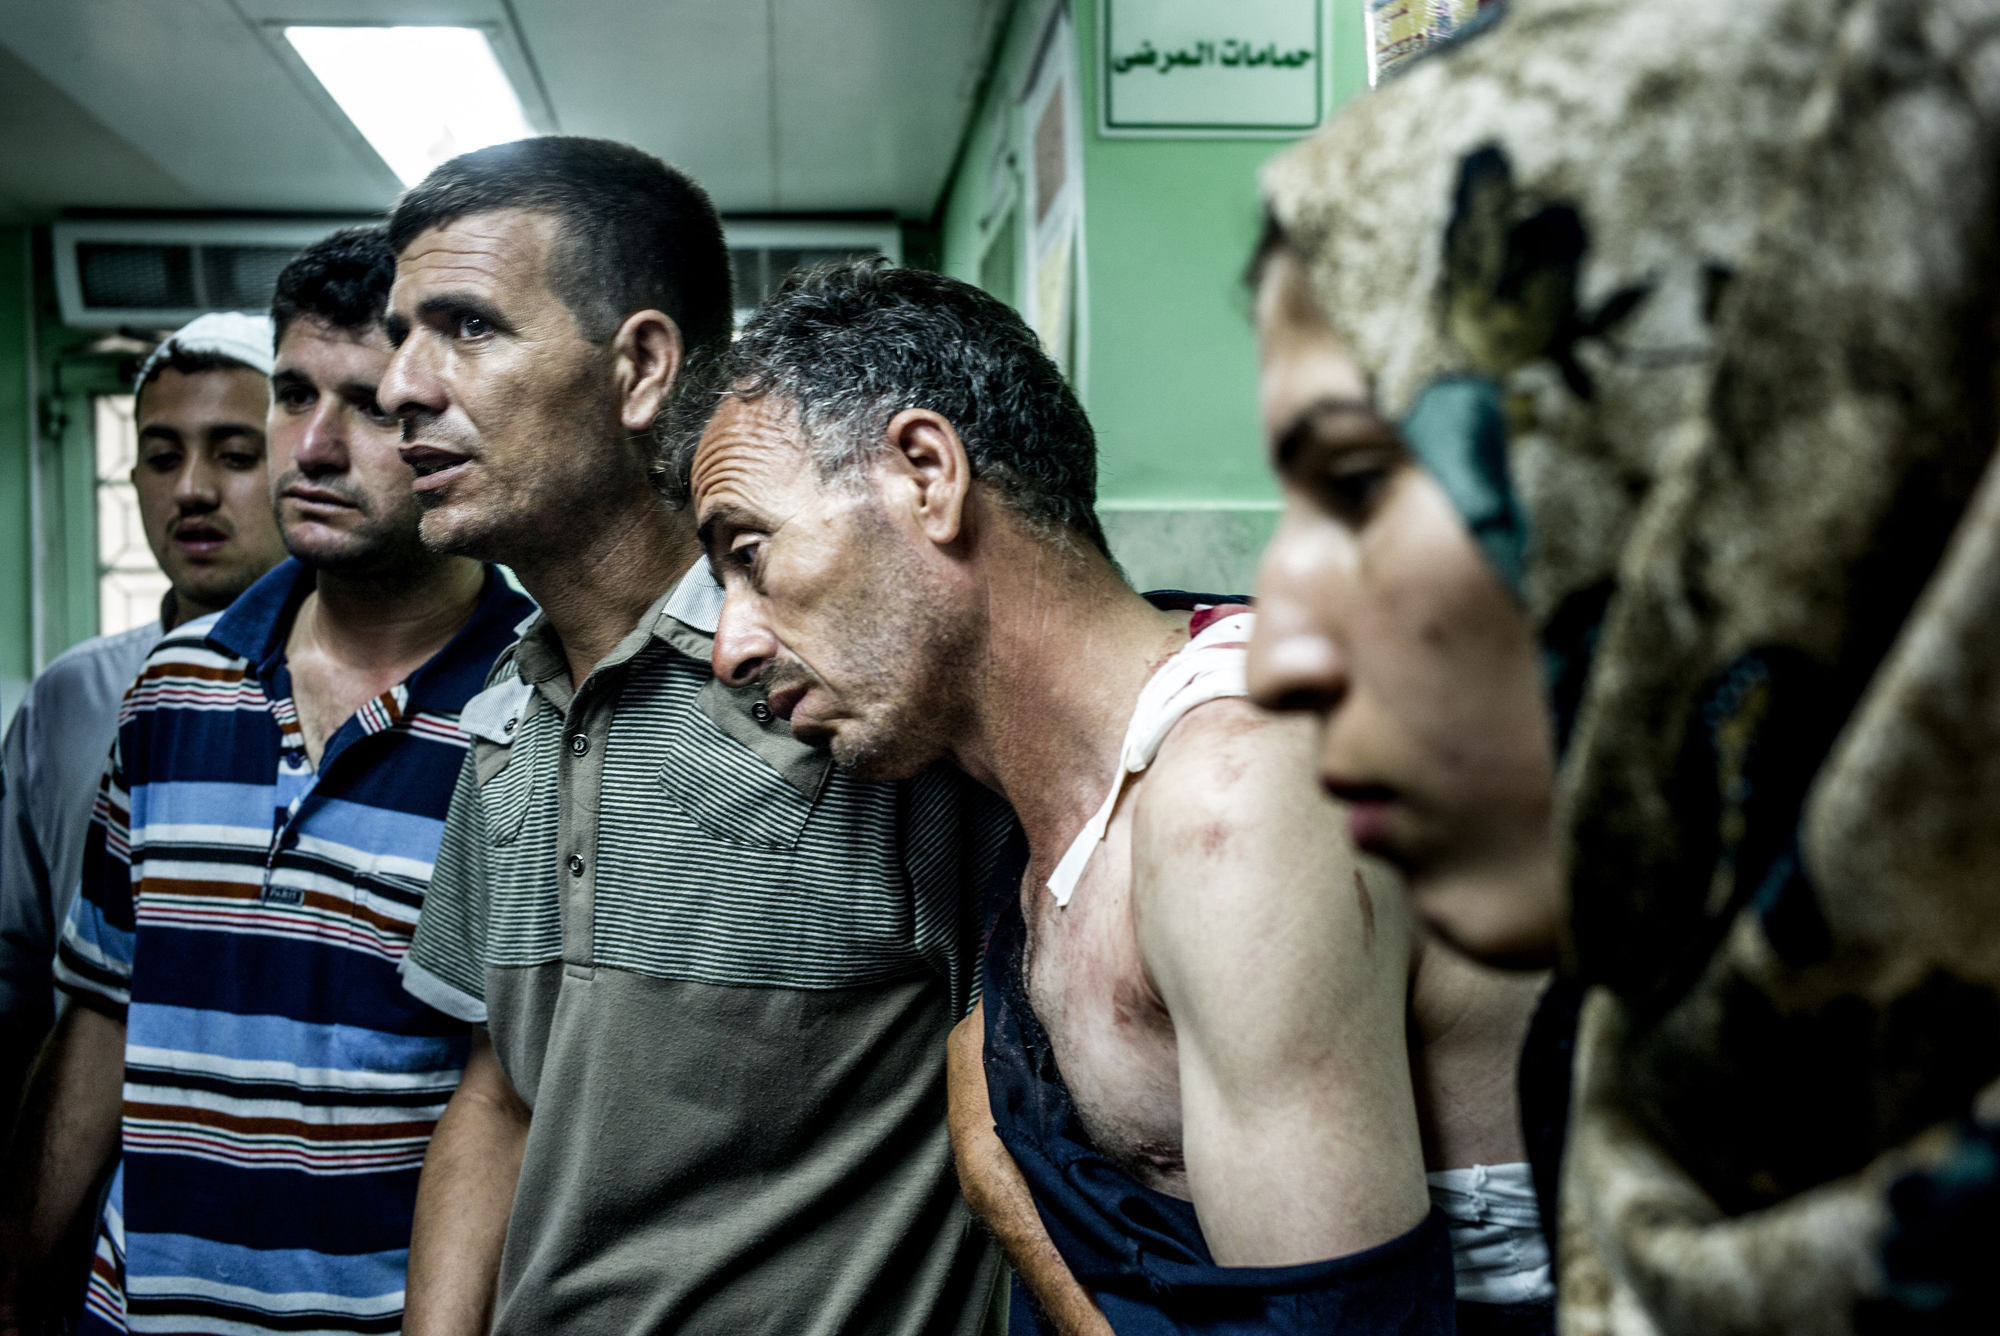 Palestinian civilians wounded during Israeli shelling of a U.N. school wait at the Kamal Odwan Hospital in northern Gaza Strip on July 30, 2014 (Marco Longari—AFP/Getty Images)